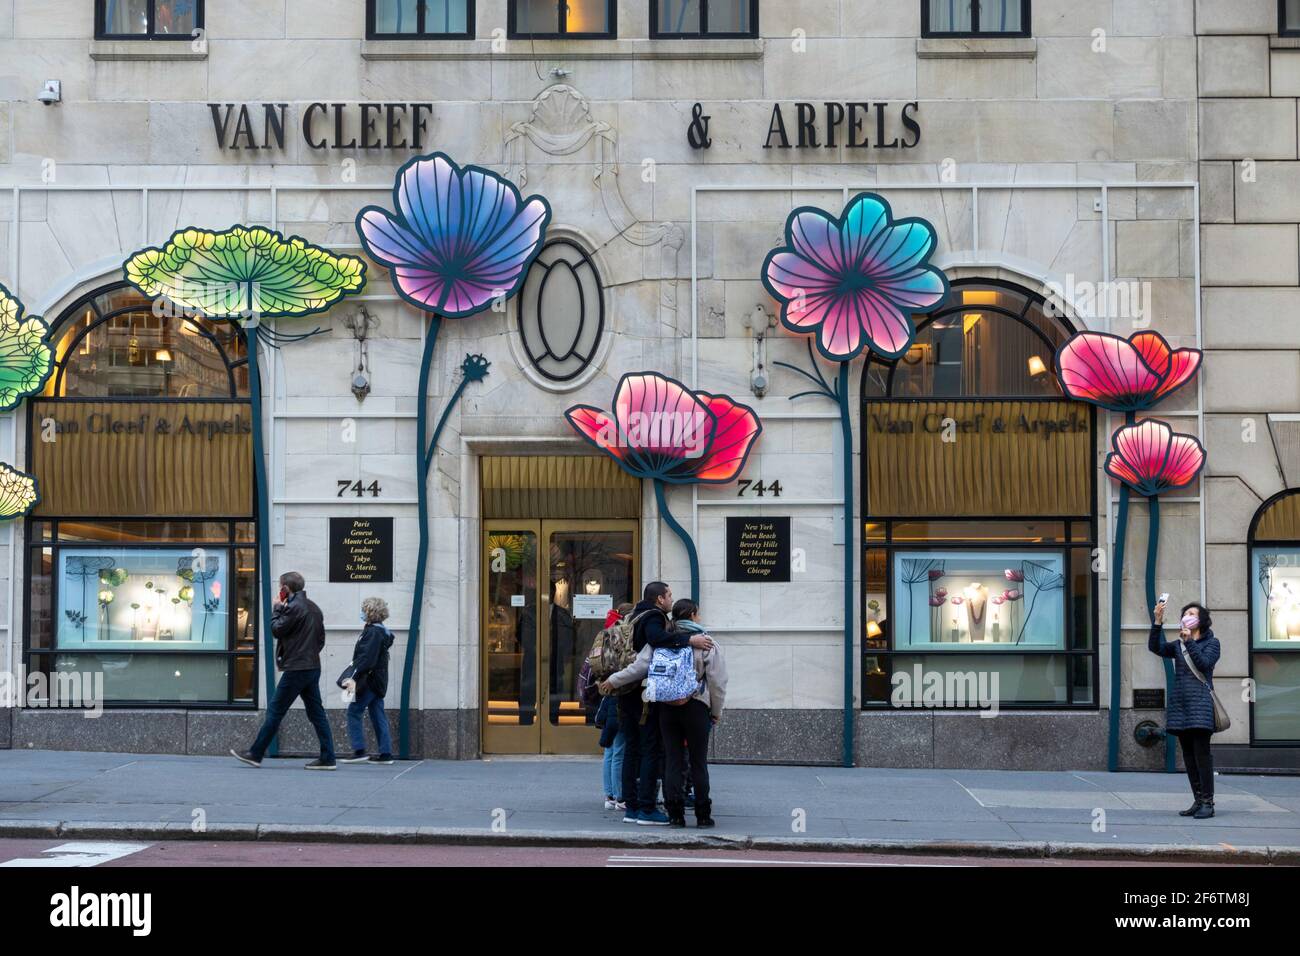 Van Cleef & Arpels is a luxury jewelry store on Fifth Avenue in New York City, USA Stock Photo